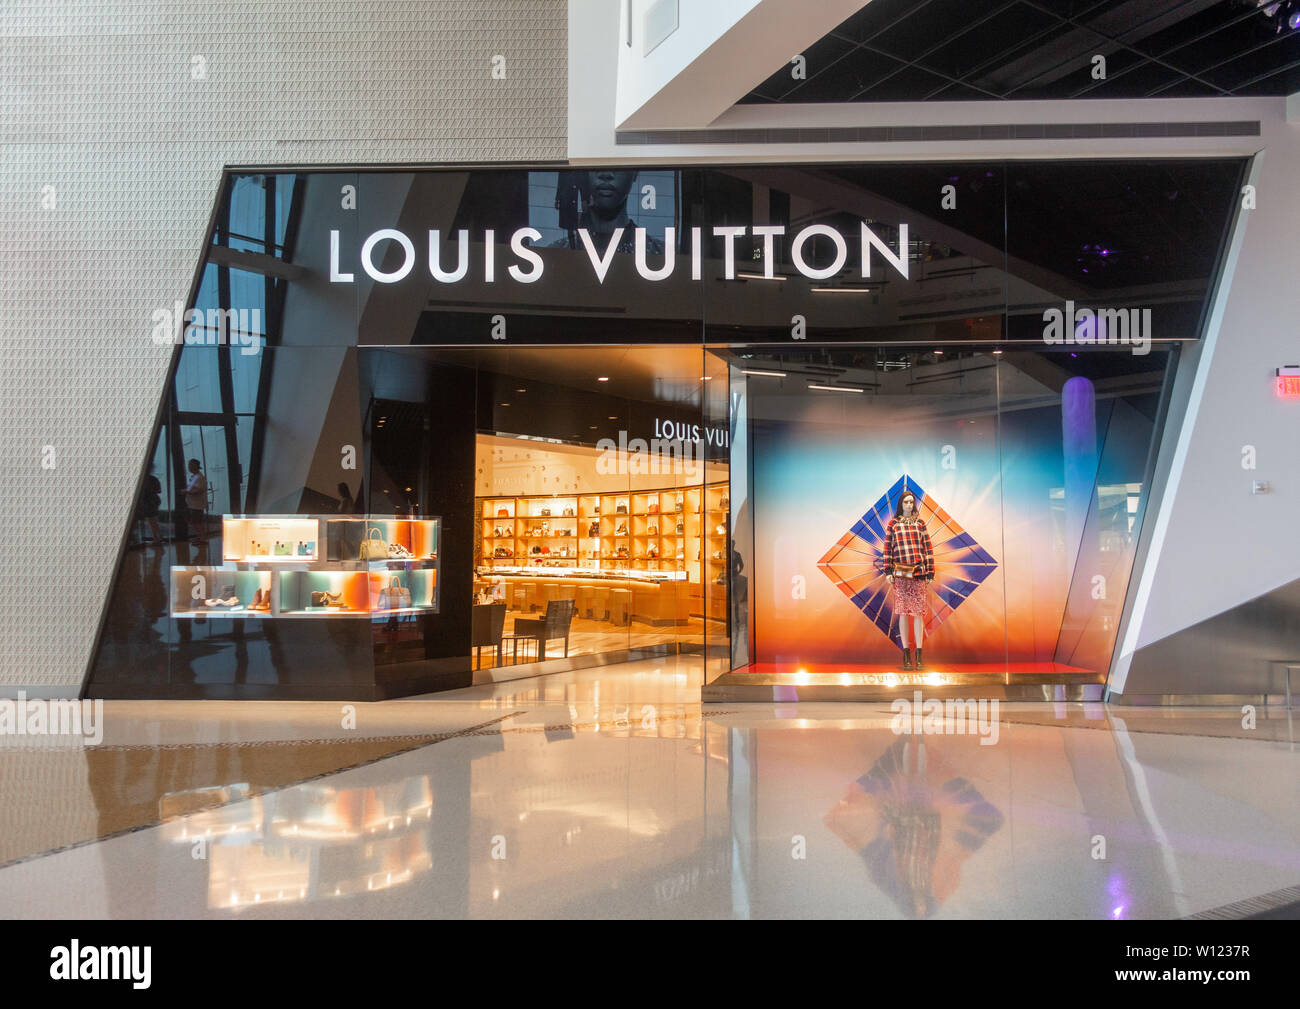 Louis Vuitton outlet at the Crystals at City Center Las Vegas